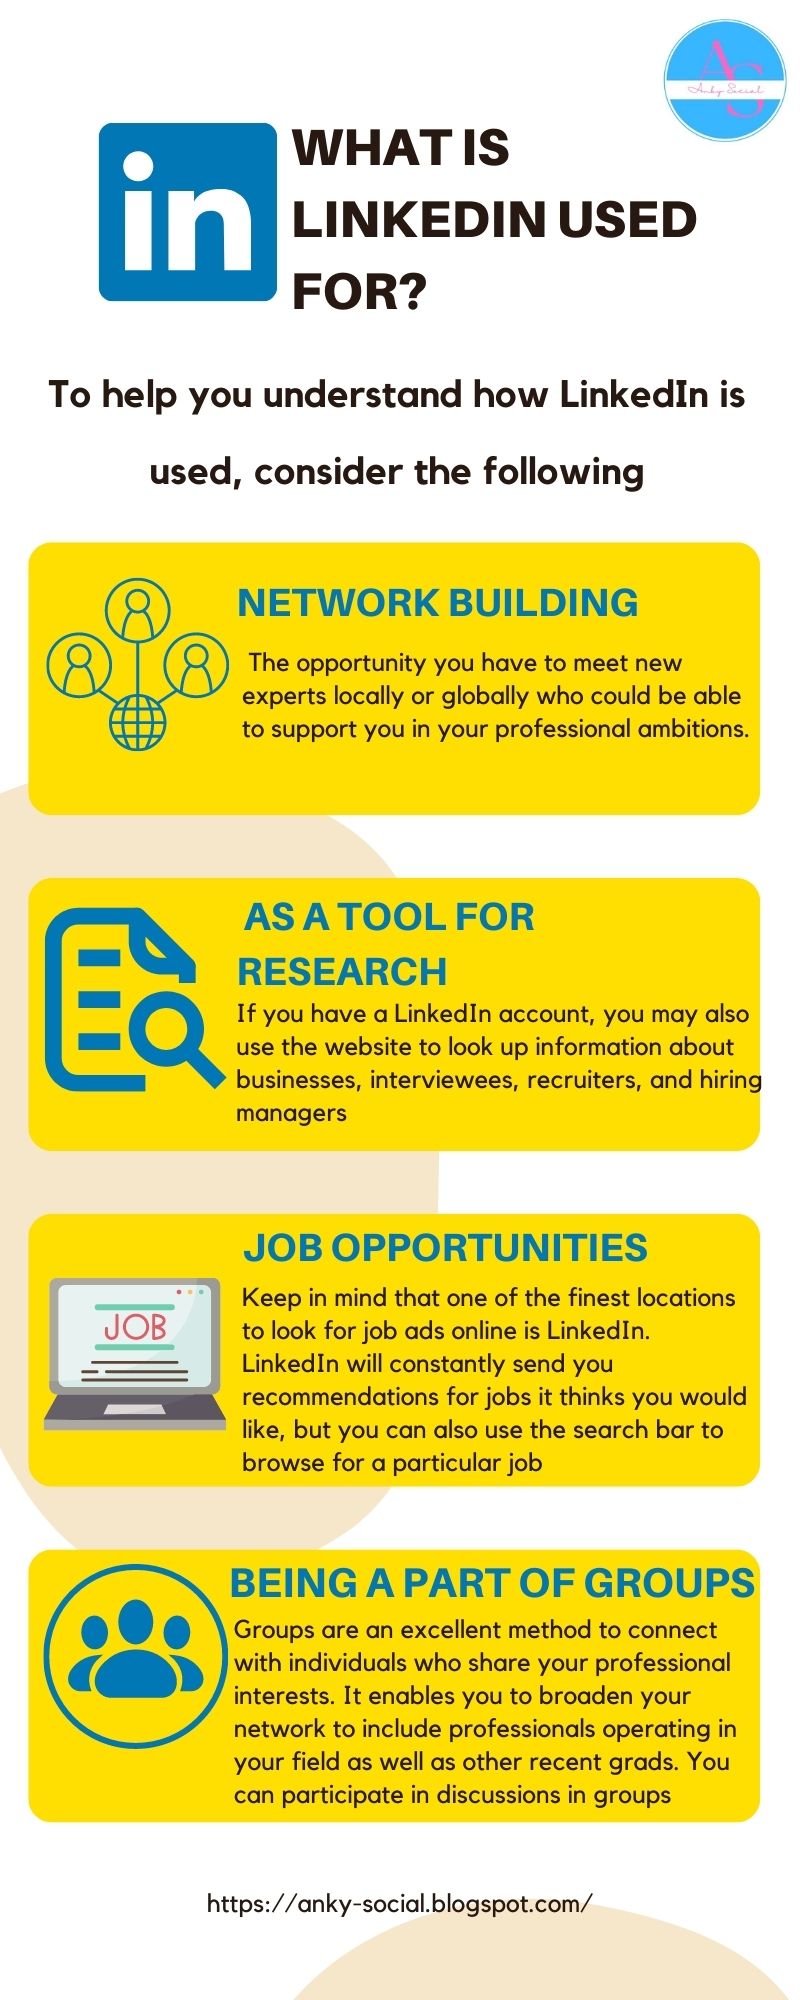 What is LinkedIn Used For?